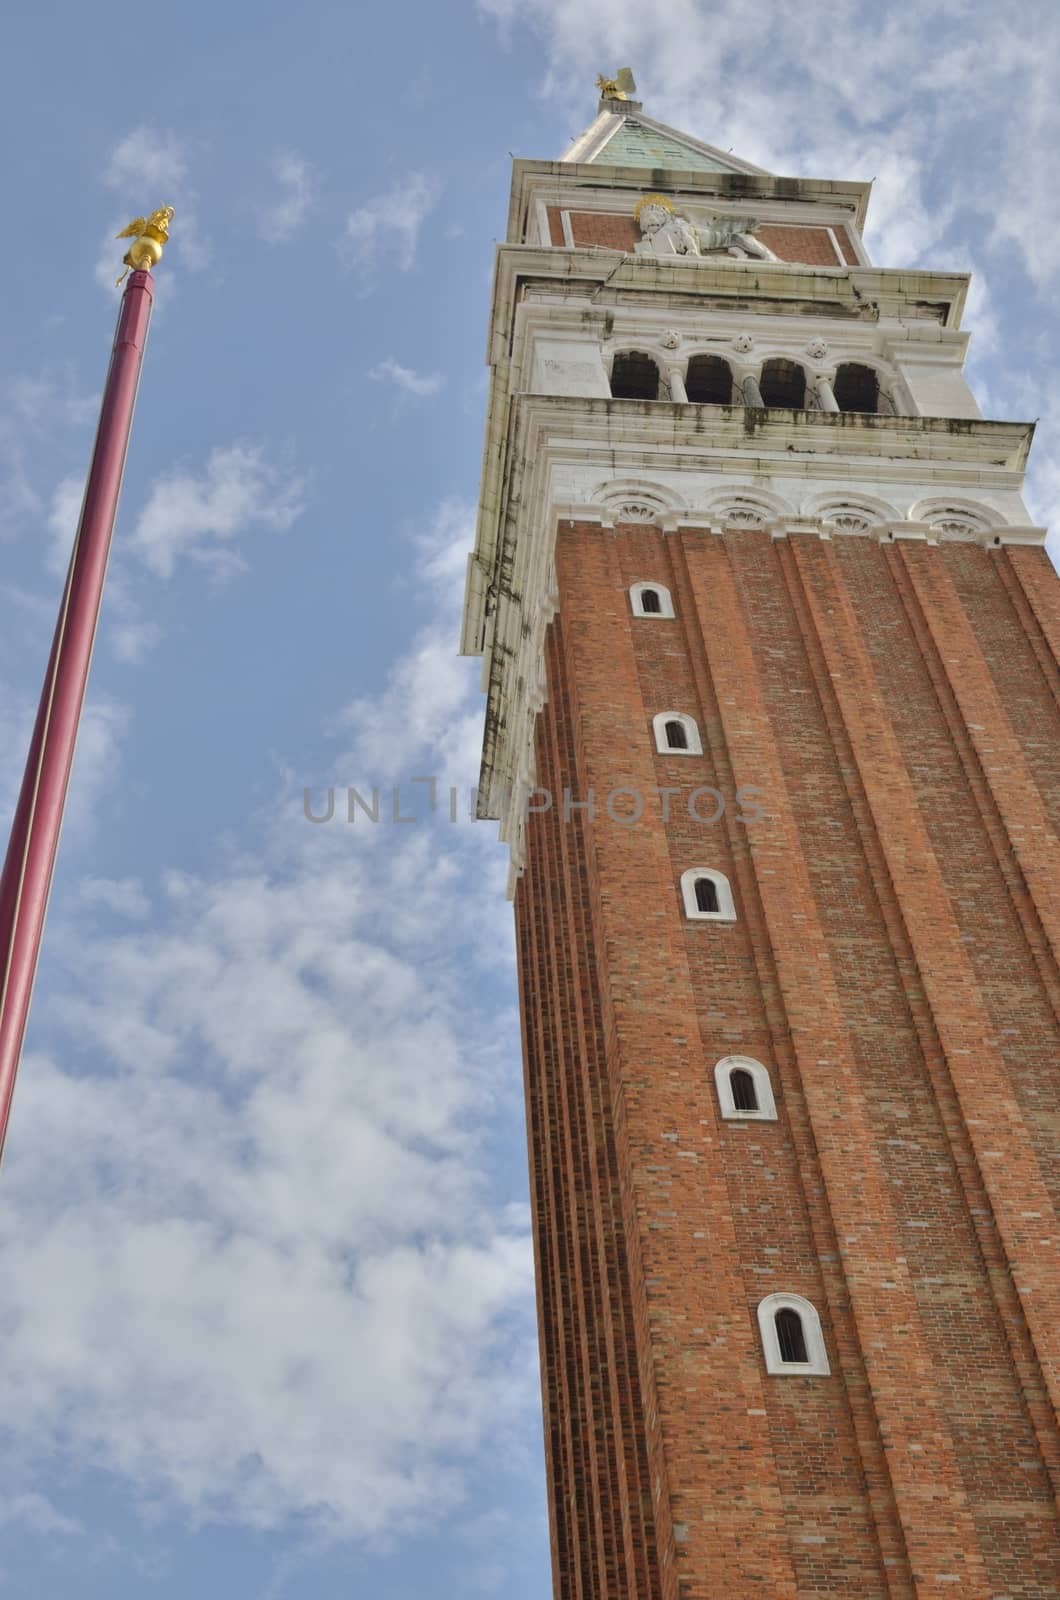 St Mark Campanile is the bell tower of St Mark Basilica in Venice, Italy, located in the Plaza San Marco. It is one of the most recognizable symbols of the city.